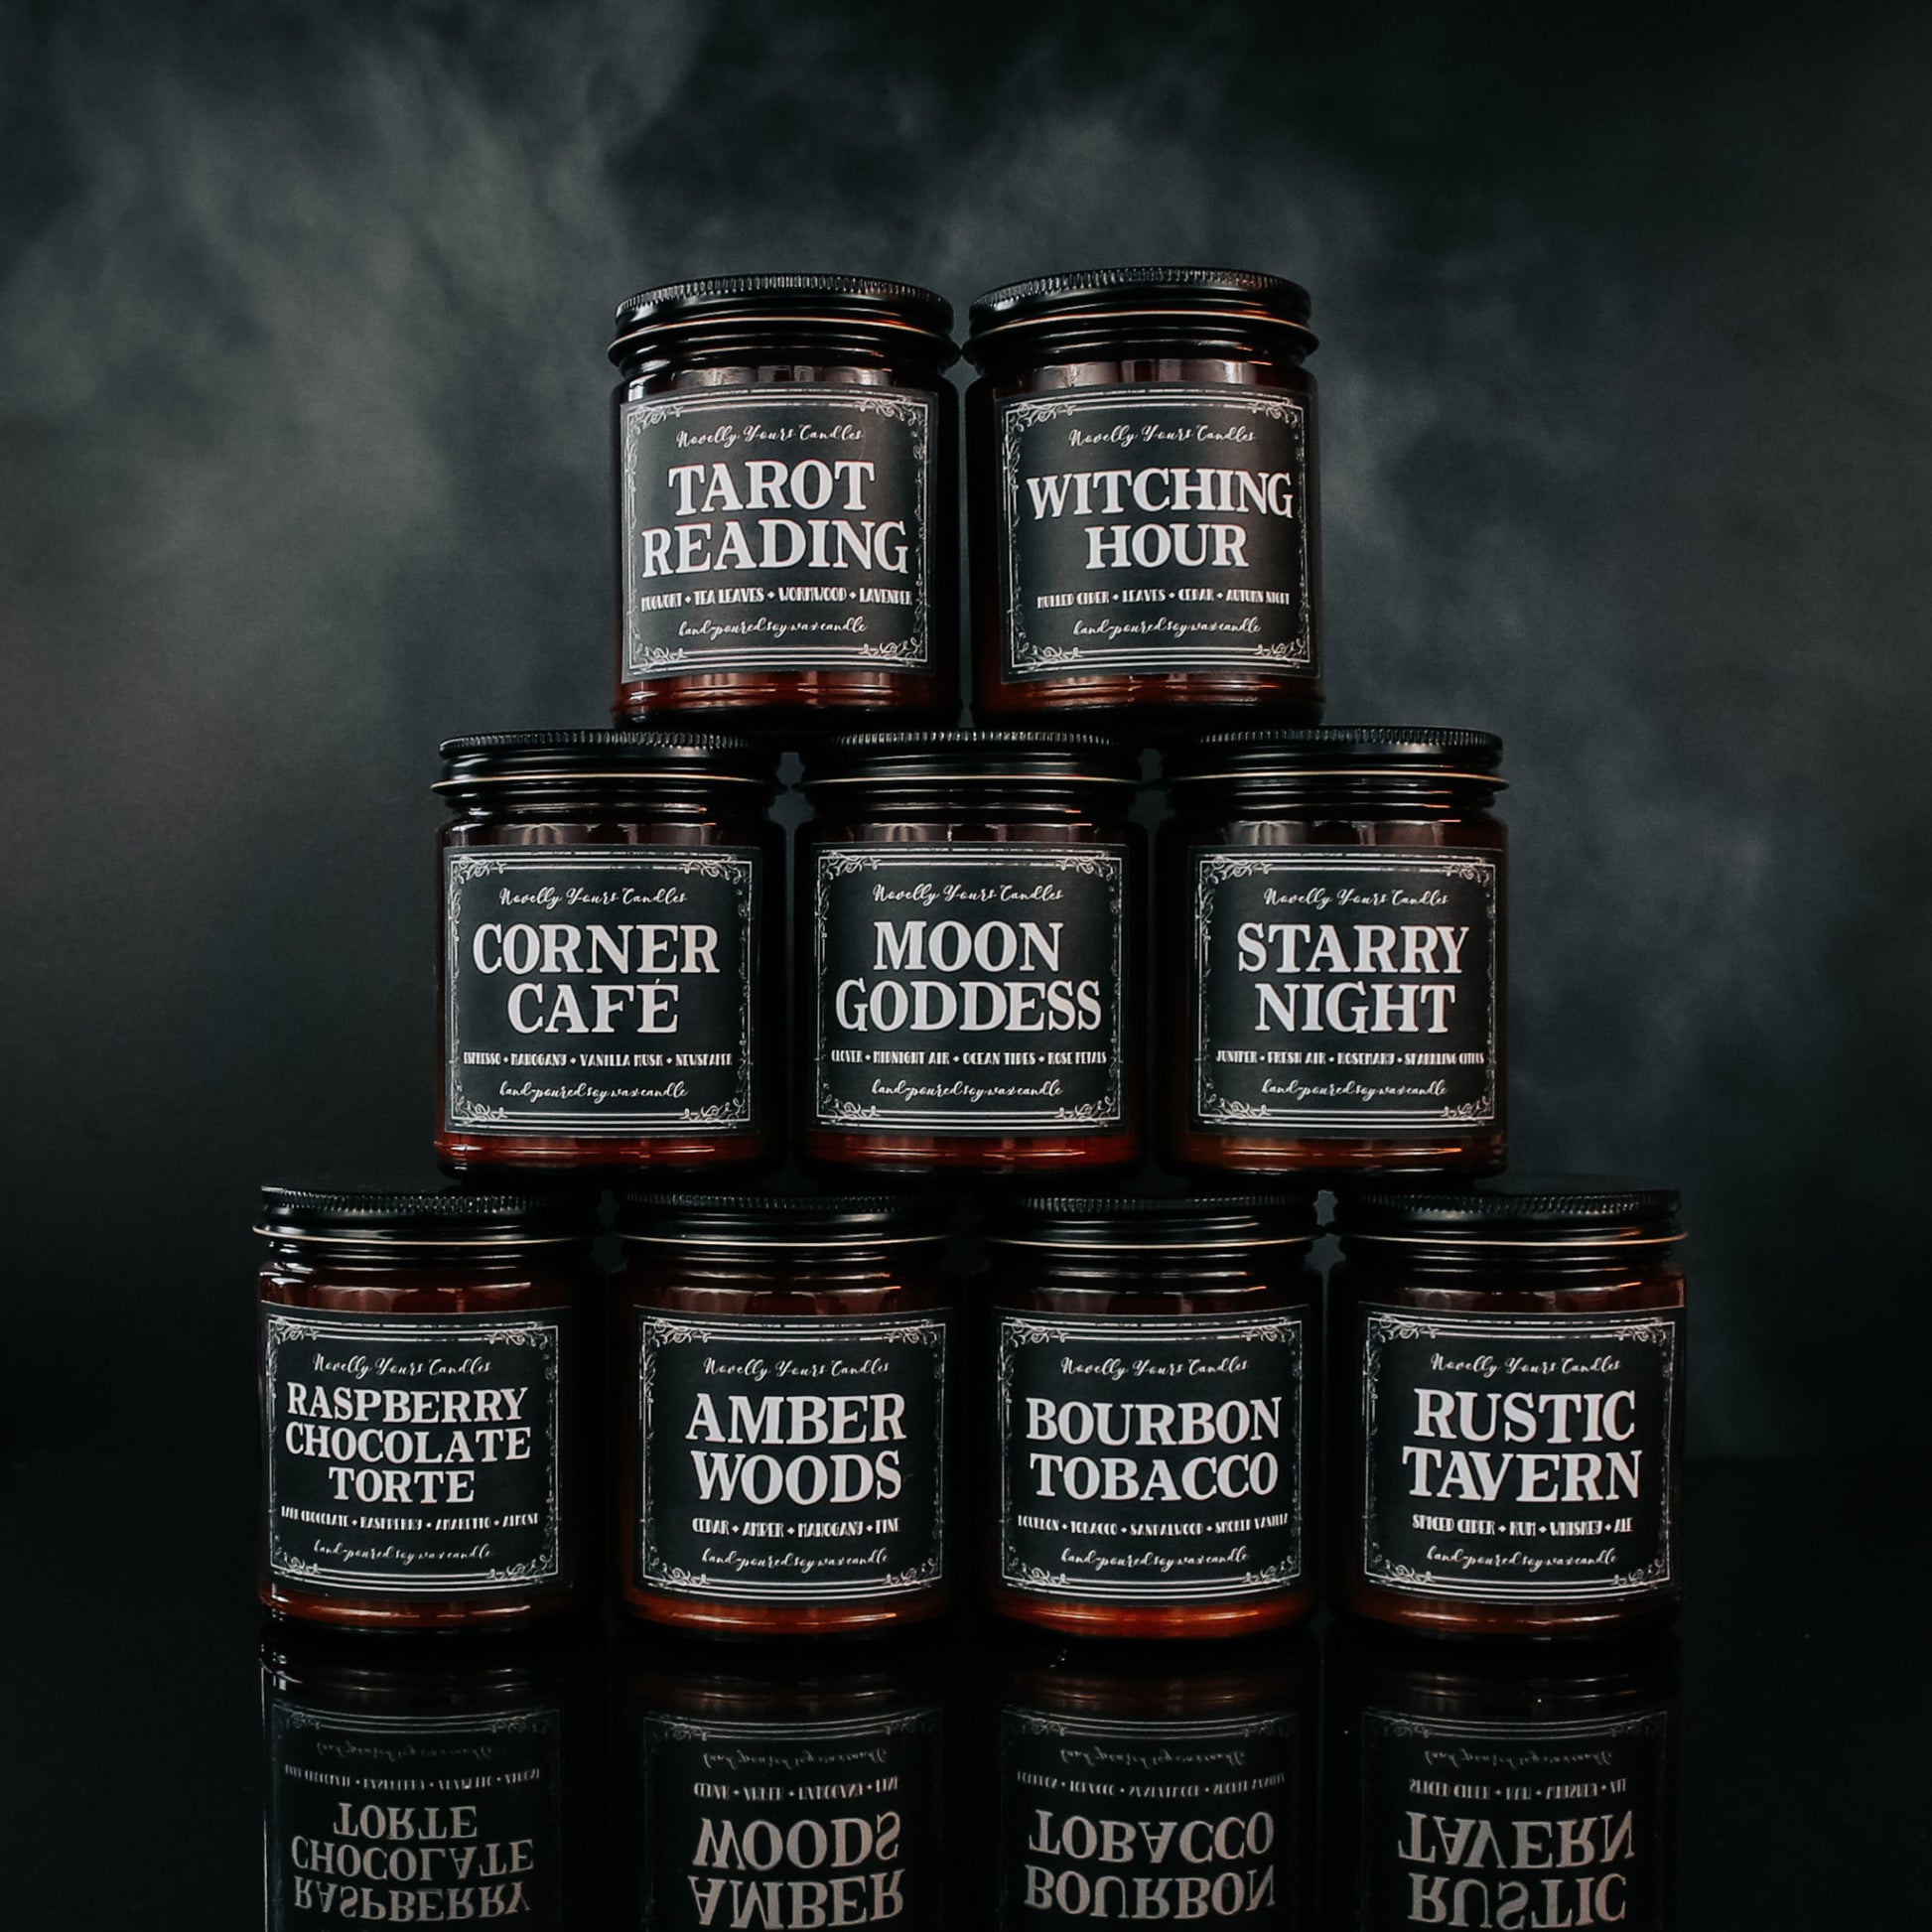 a stack of candles in amber glass jars with black lids and black lids against a smoky black background